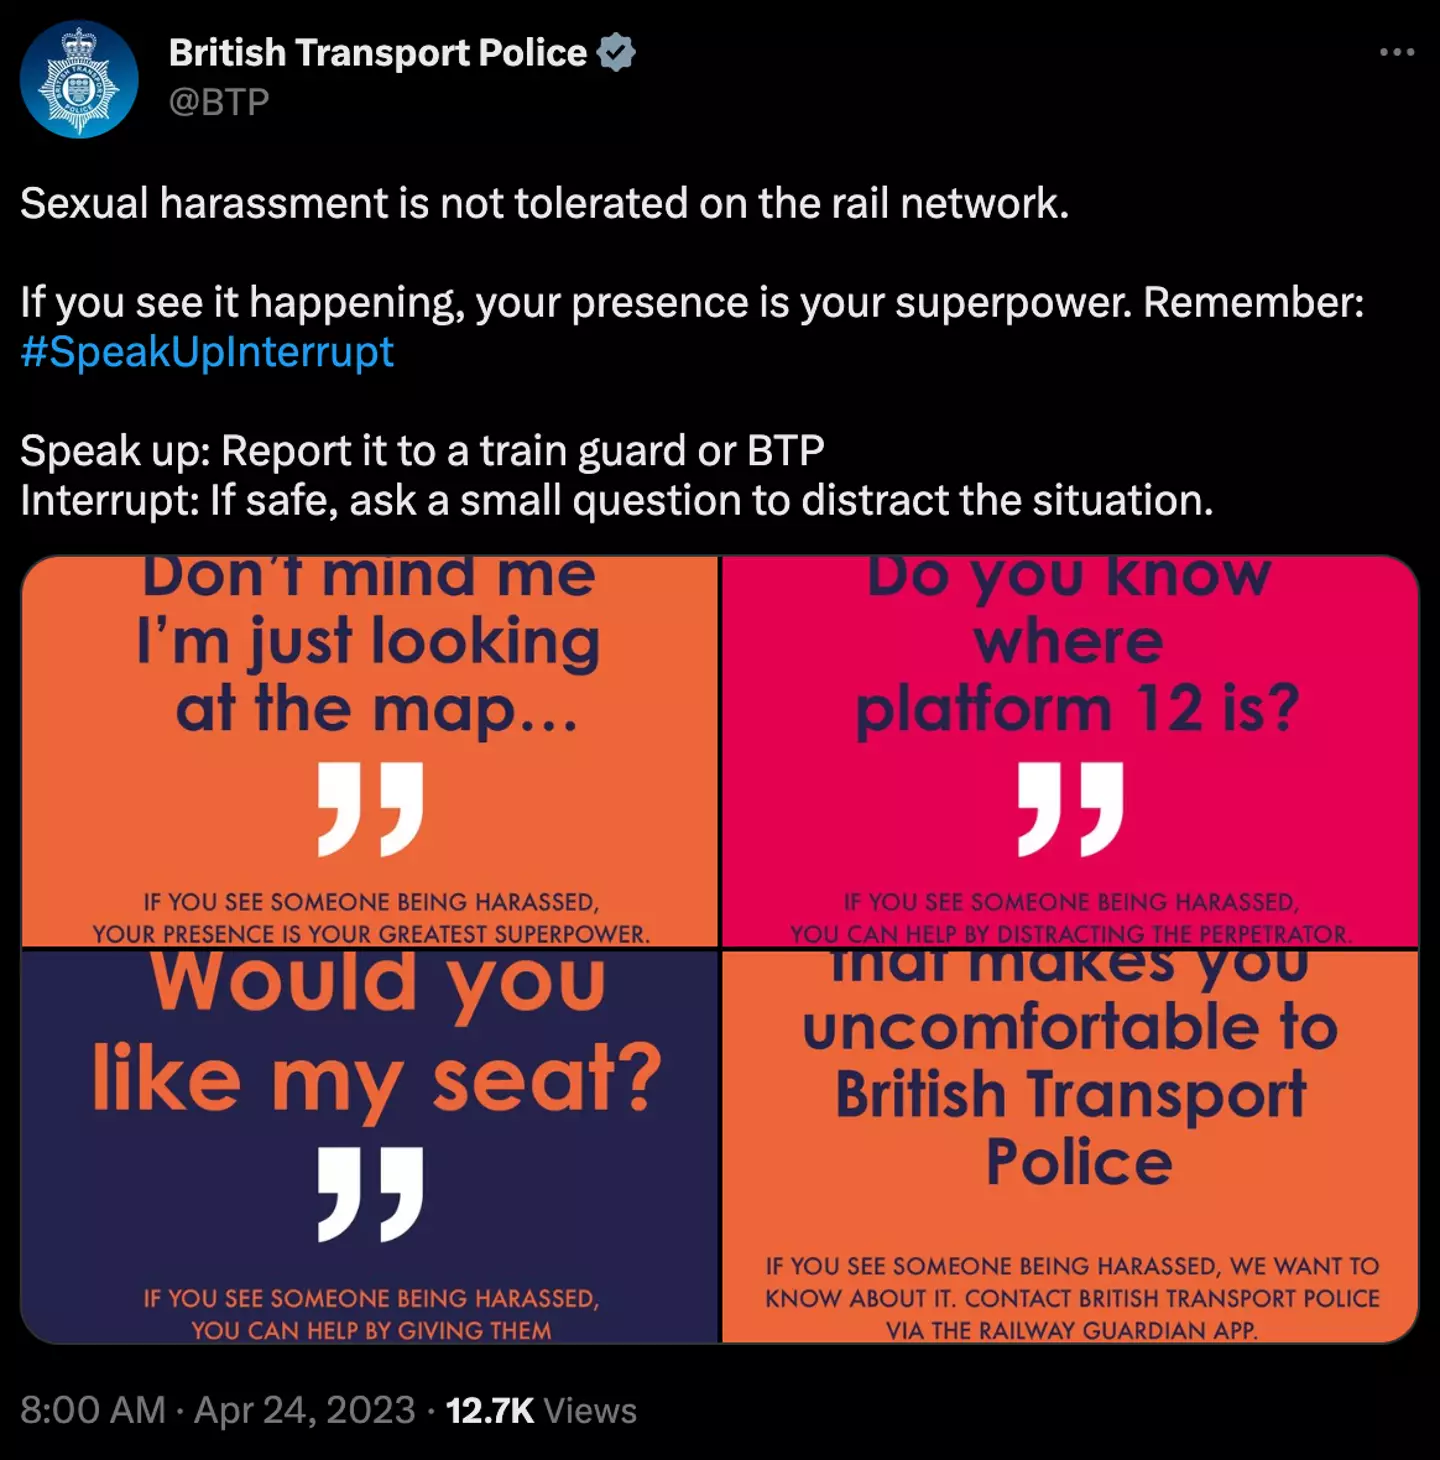 British Transport Police offer advice on how to safely intervene as a bystander.